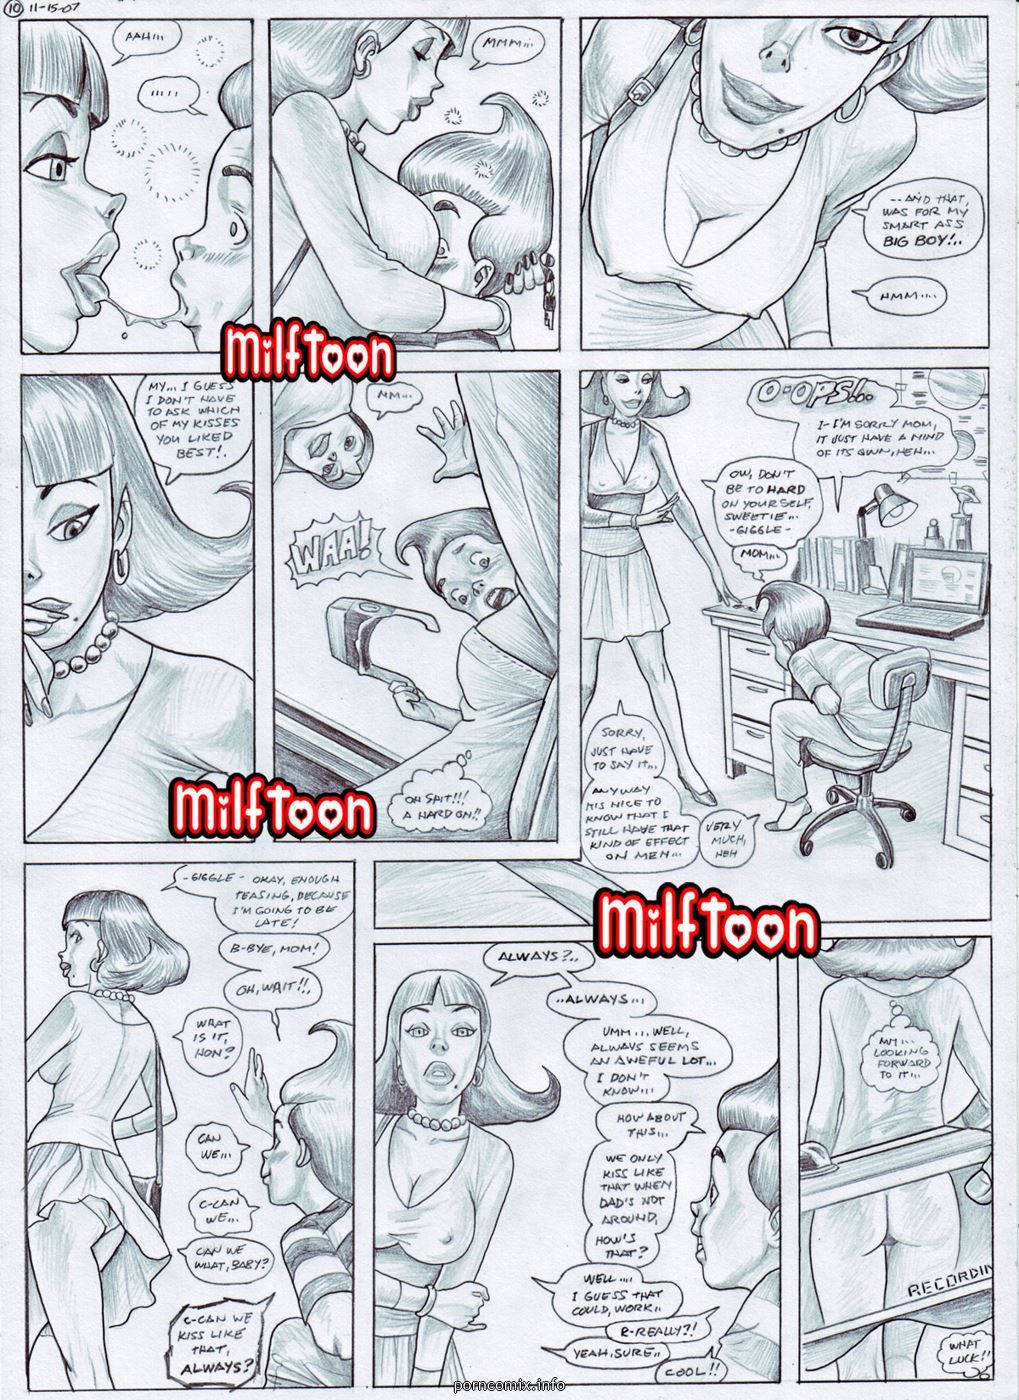 Milftoon - Jimmy Naitron page 11